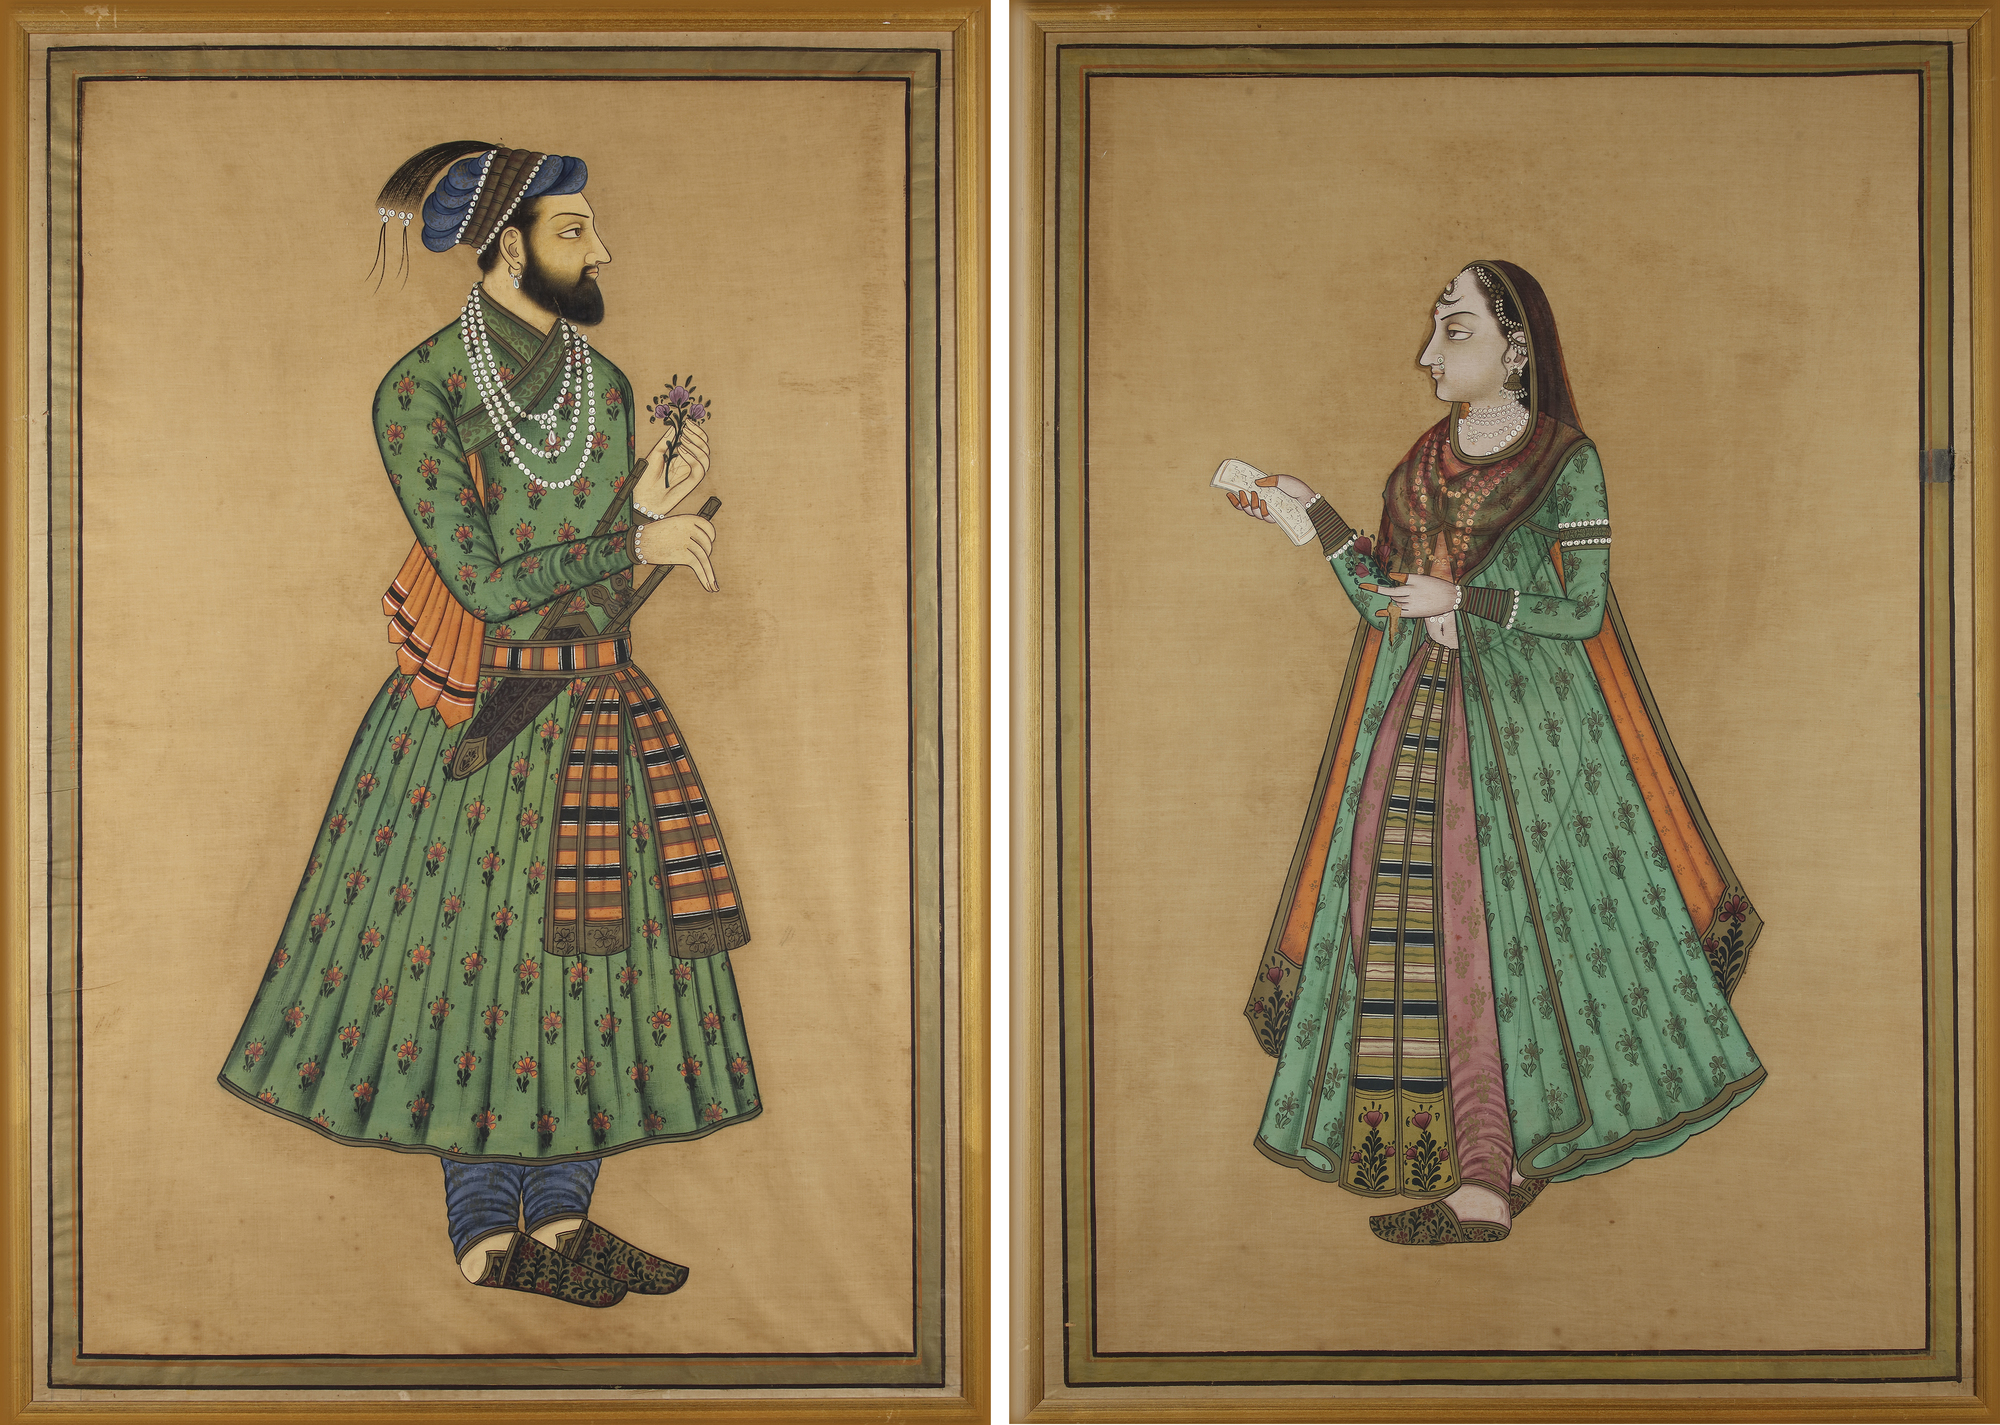 Confucius and Tolstoy in India: Shi Lu's Paintings of 1970 and the  Socialist Culture of Maoist‐Period China - Noth - 2016 - Art History -  Wiley Online Library